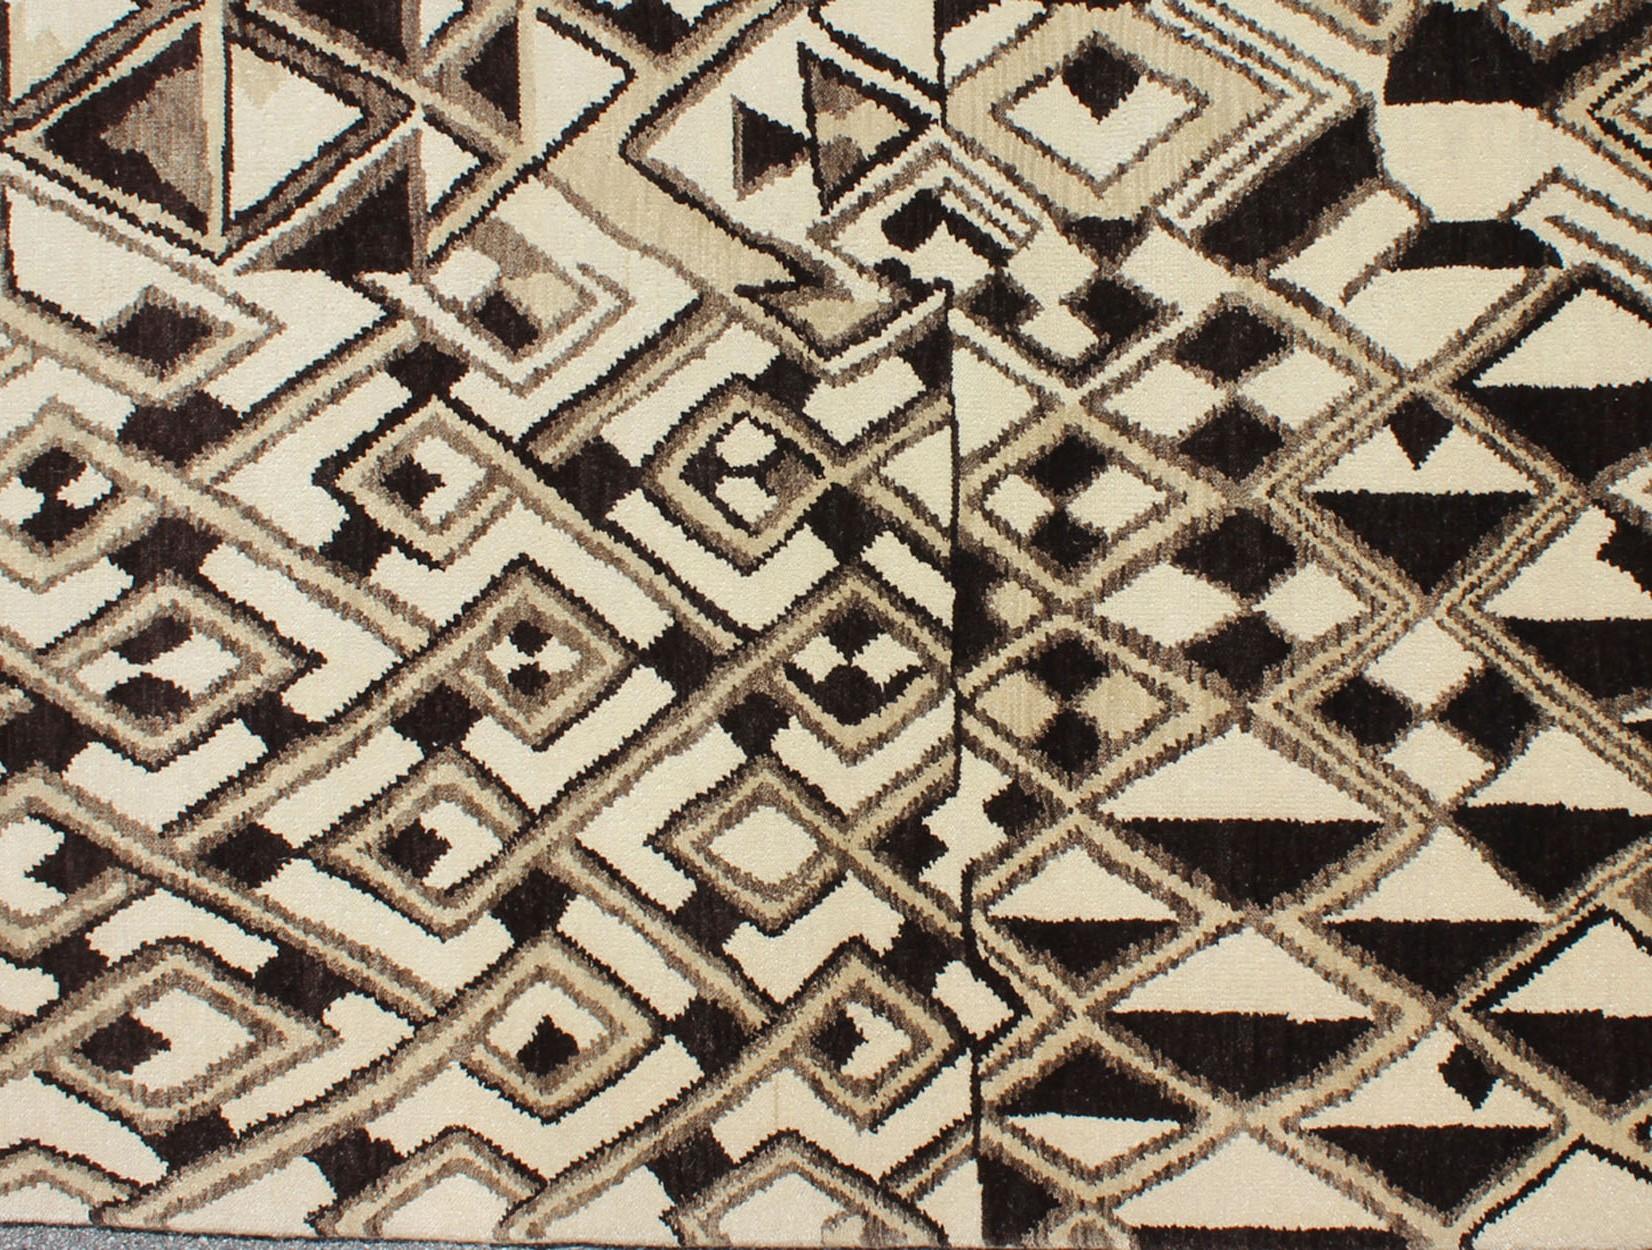 Tribal Moroccan rug, rug OB-9261577-527008, country of origin / type: India / Moroccan, circa Early-21st Century.

Measures: 6'0 x 9'0.

This stunning hand-woven rug features an All-Over Abstract Geometric design makes a great fit for a wide variety